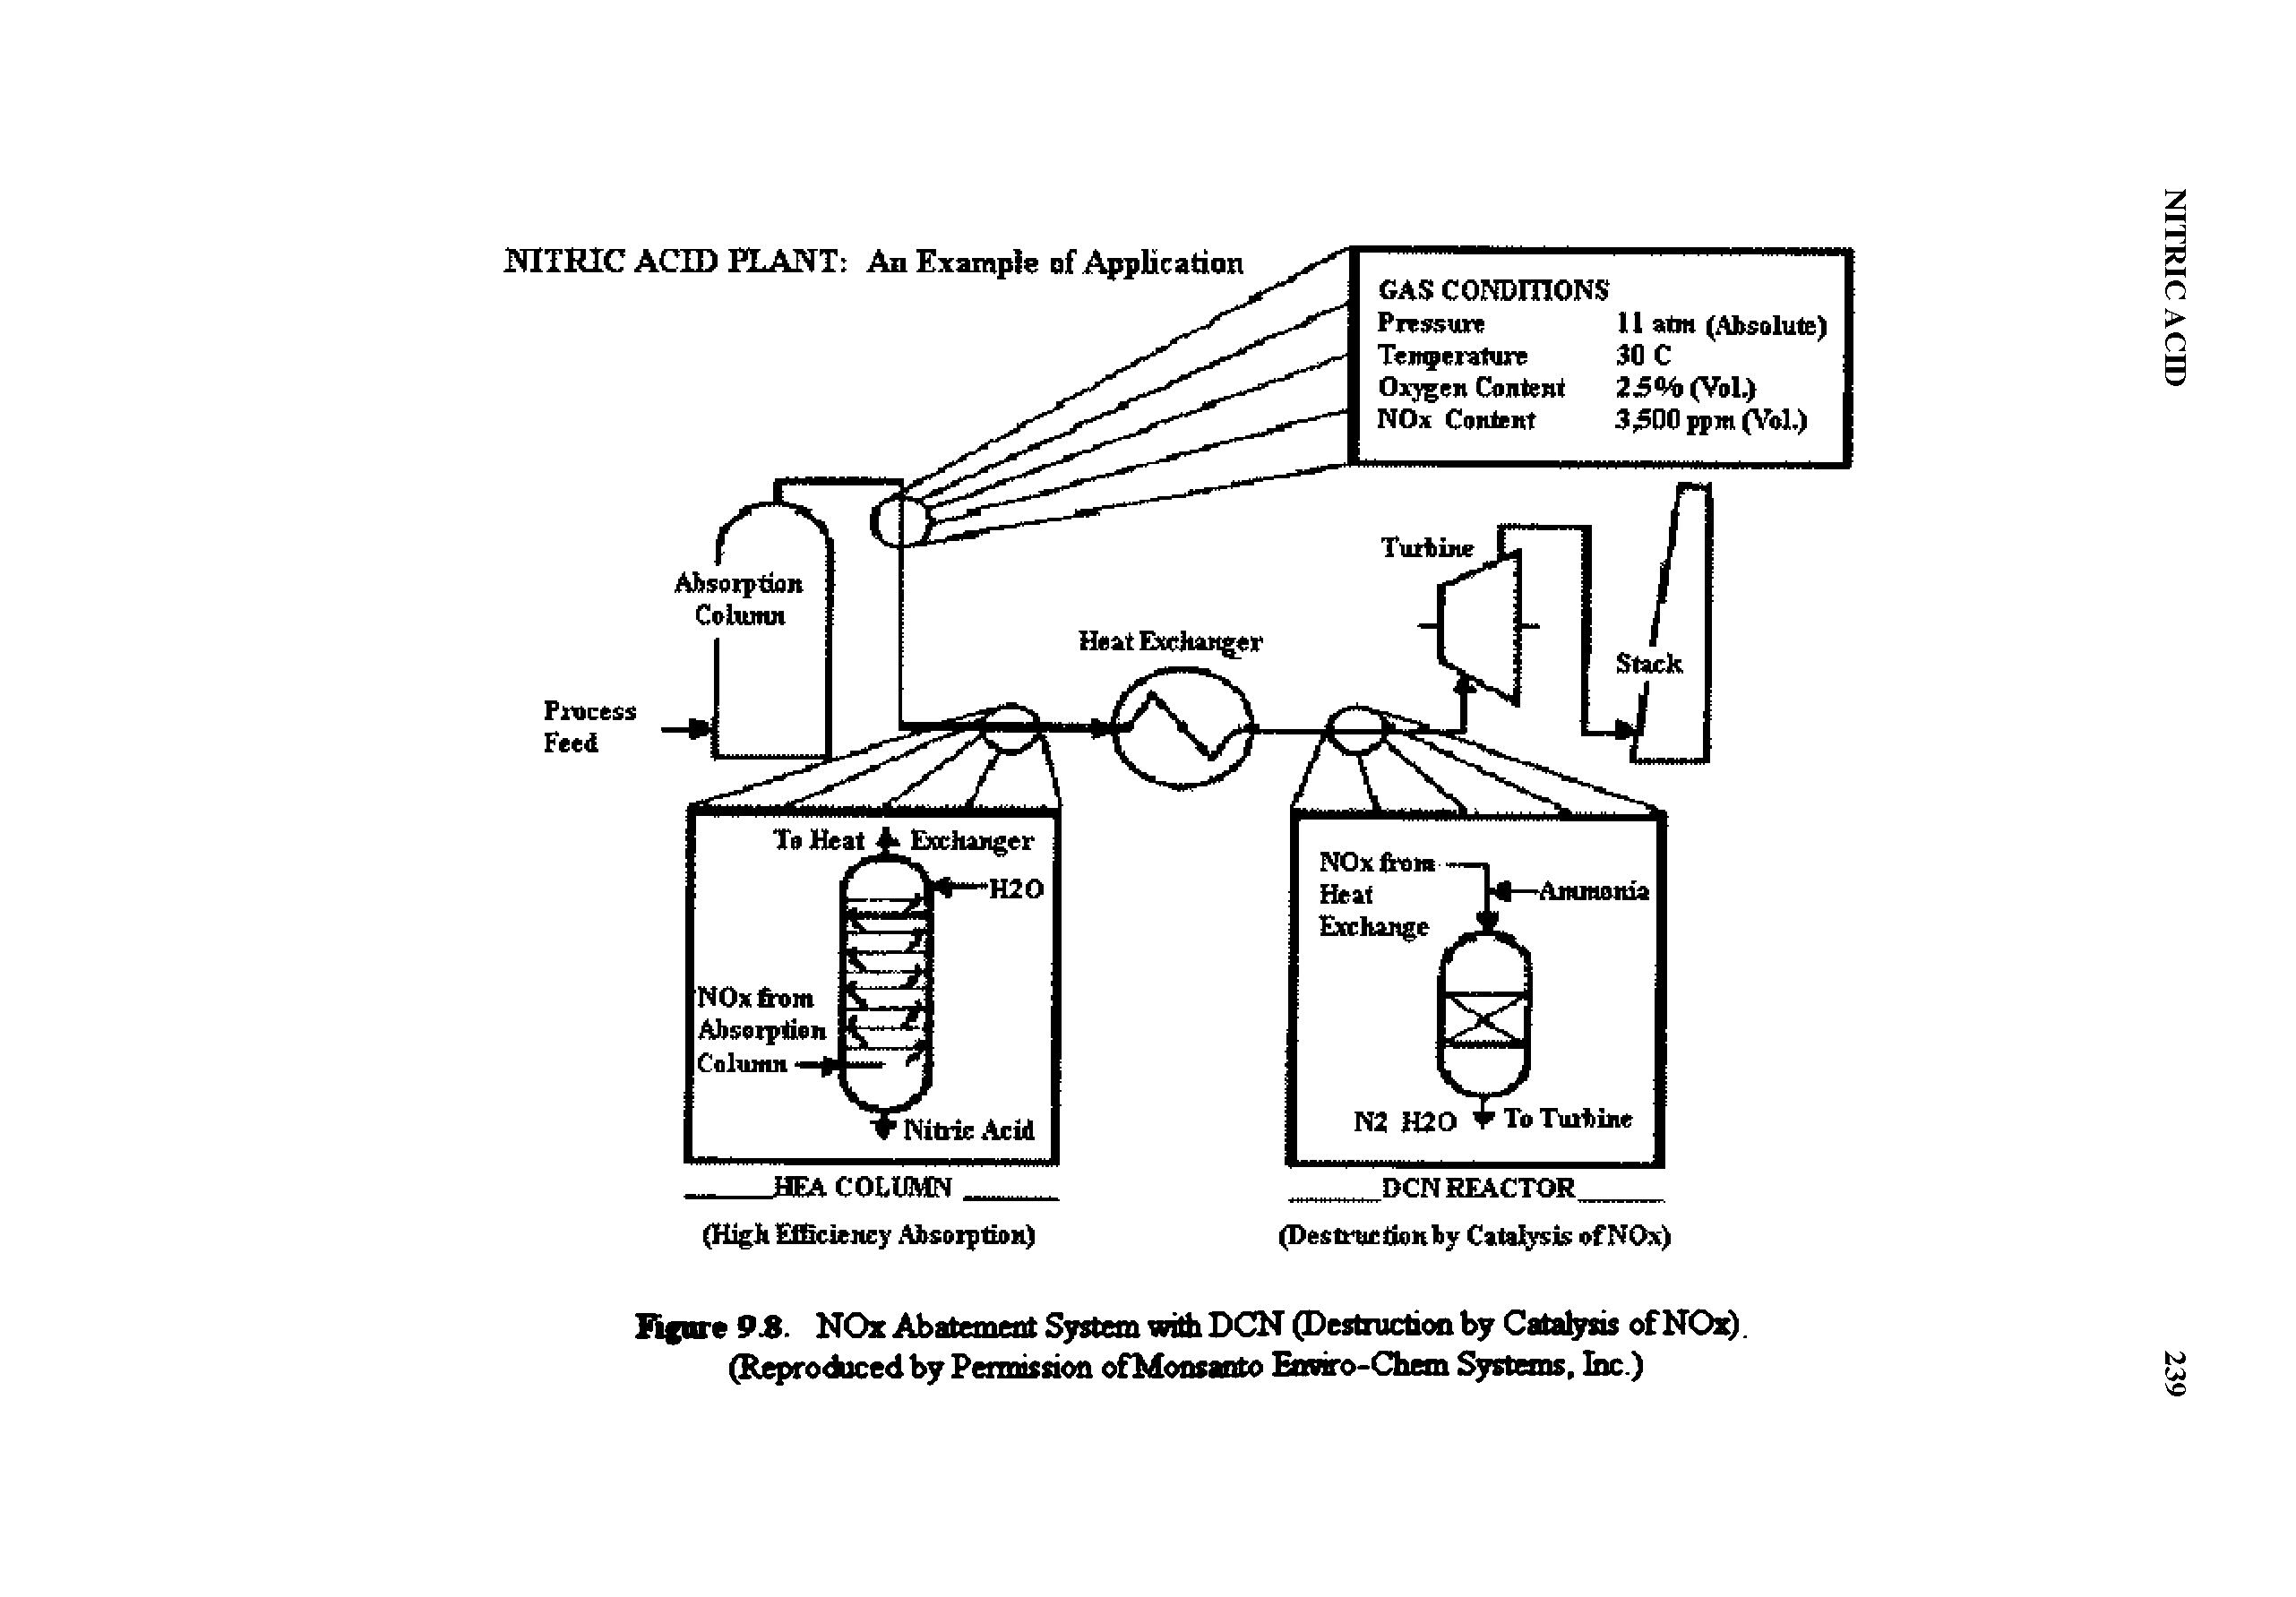 Figure 9.8. NOx Abatement System with DCN (Destruction by Catalysis of NOx) (Reproduced by Permission ofMonsanto Enmro-Chem Systems, Inc.)...